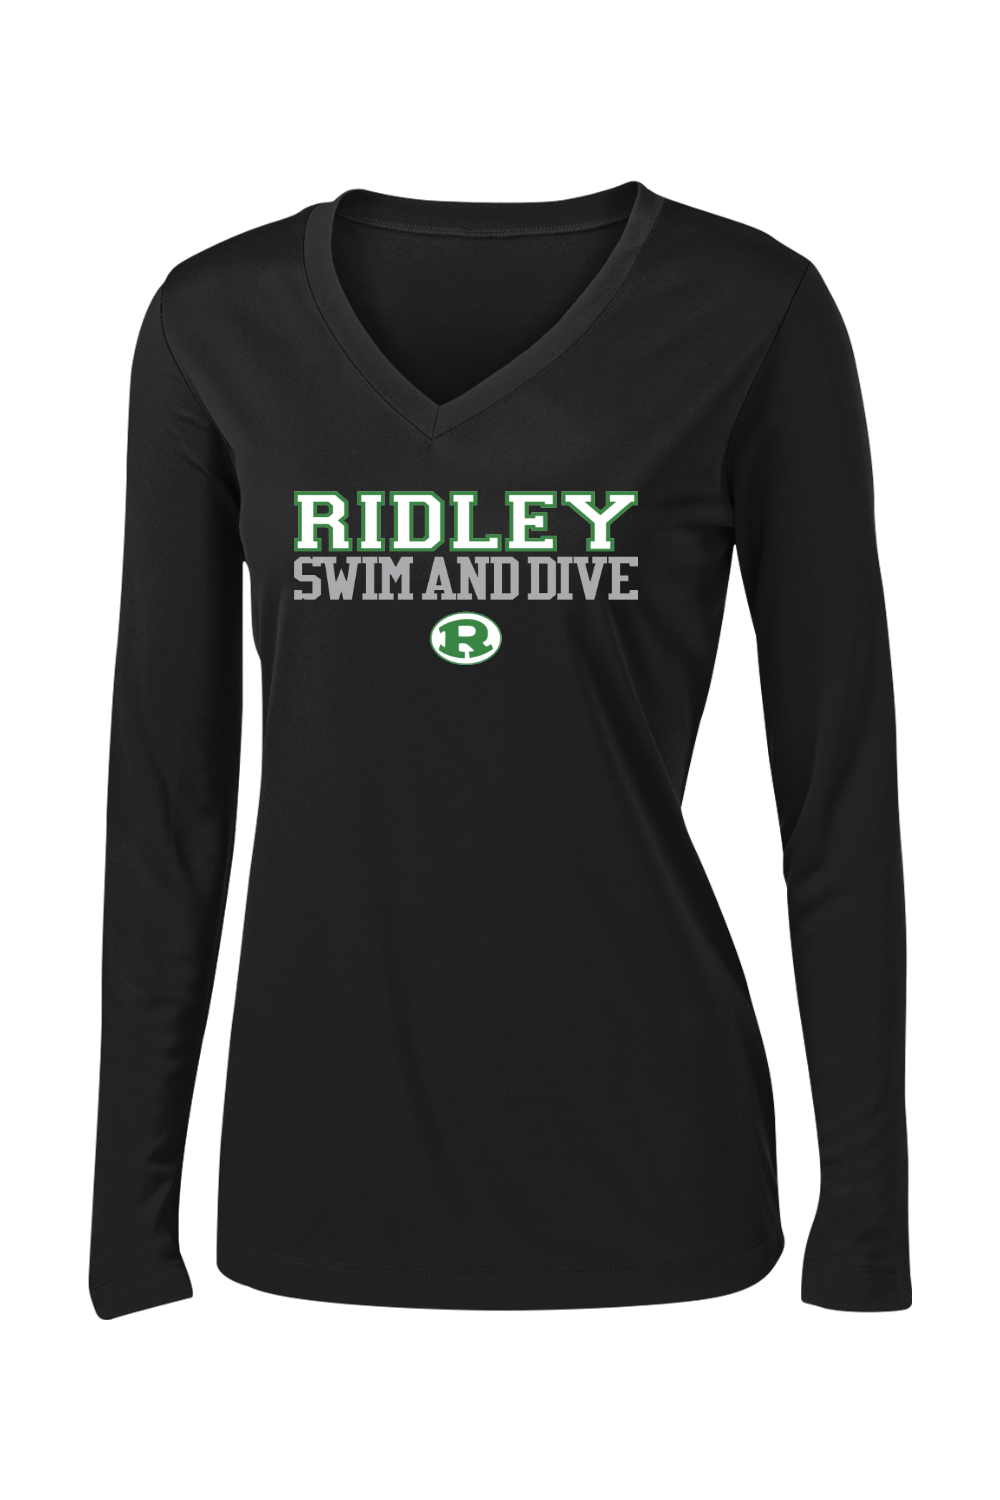 Ridley Swim and Dive Sport-Tek Ladies PosiCharge Competitor Long Sleeve V-Neck Tee